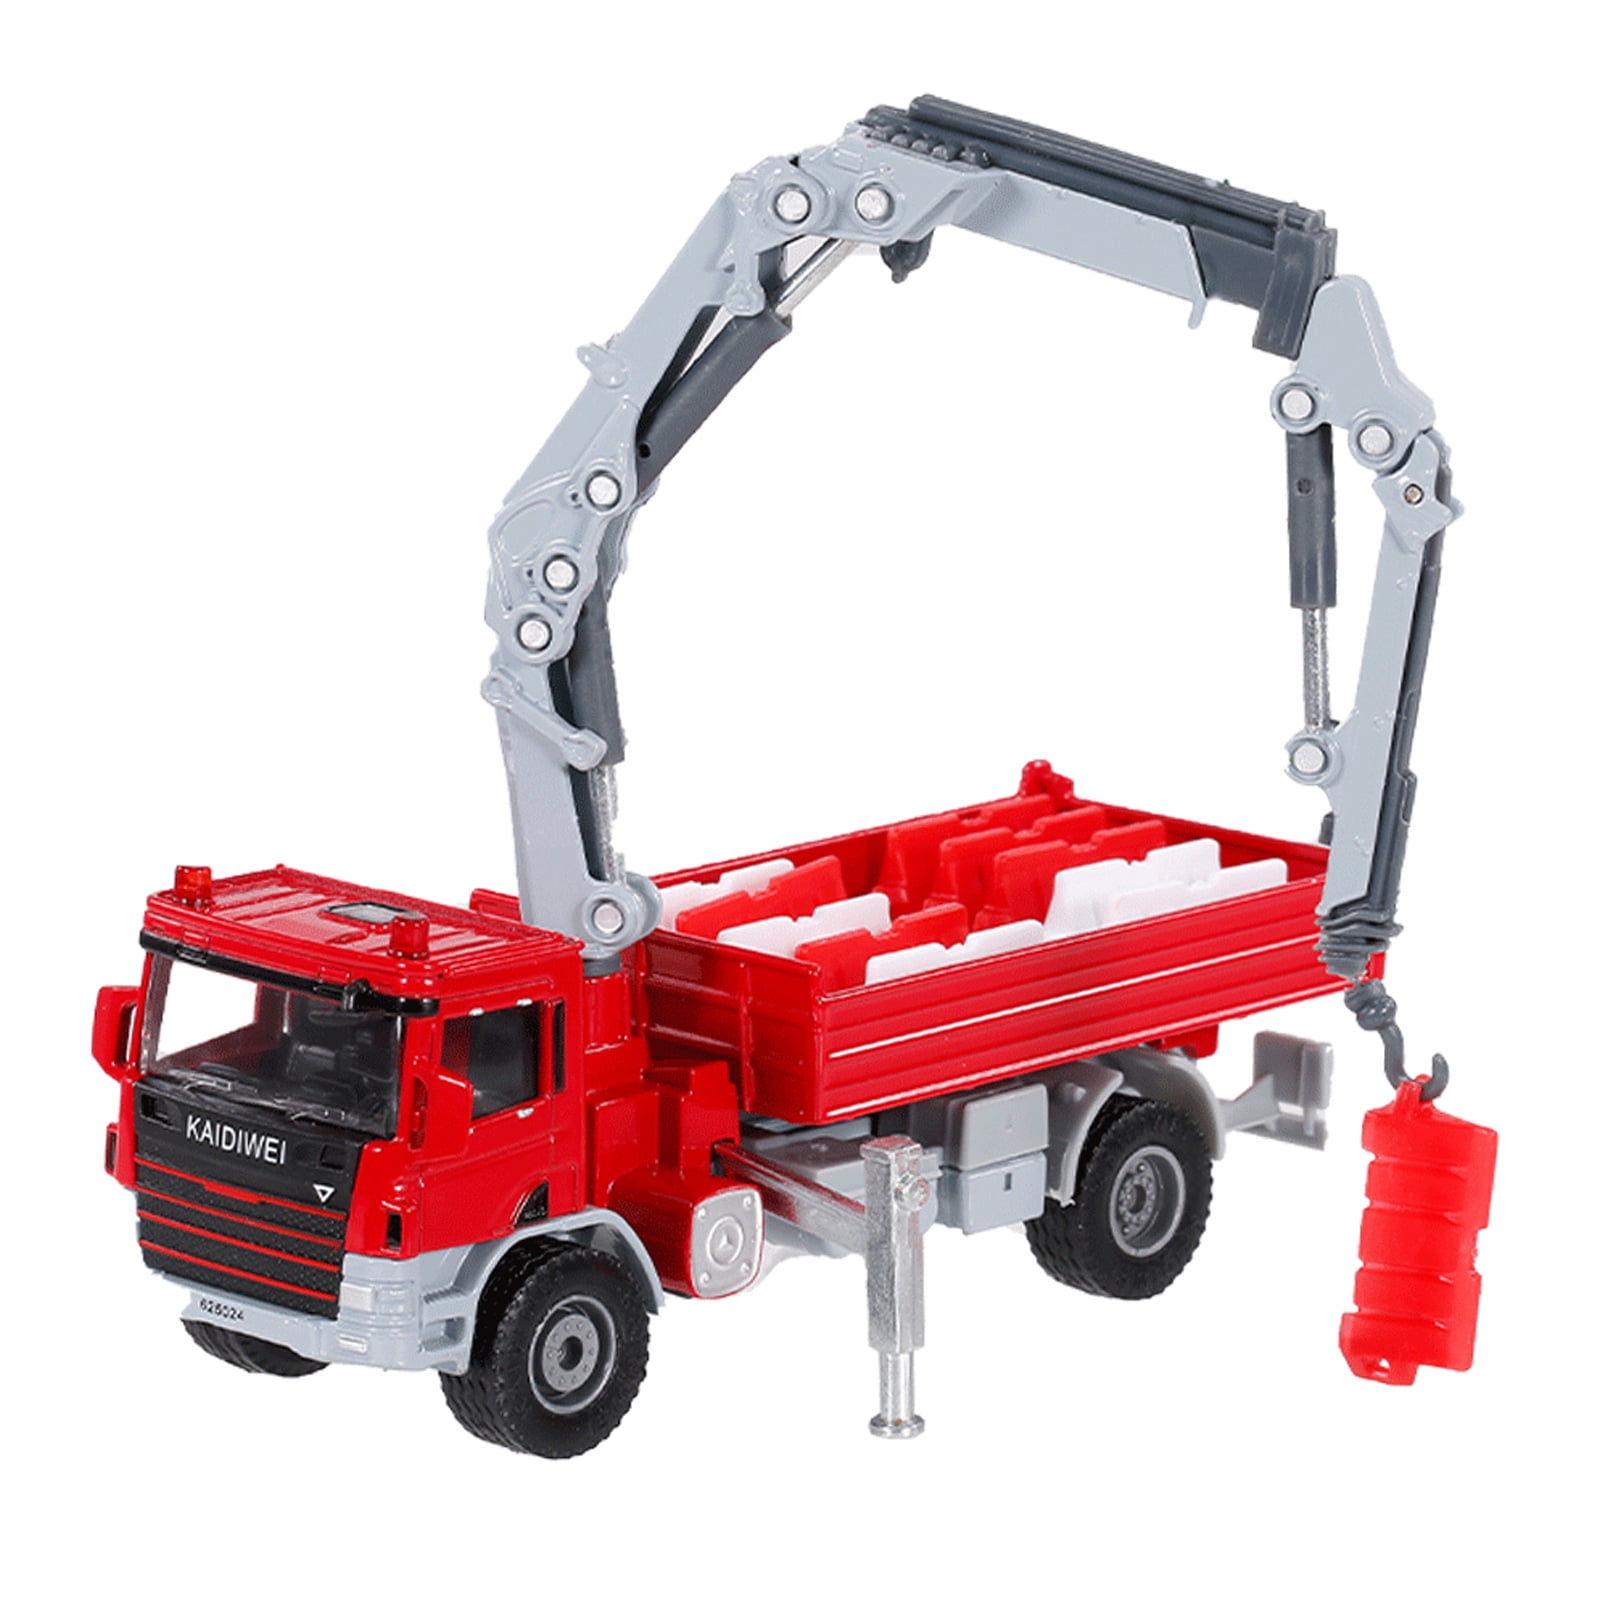 1:50 KDW Diecast Construction Dump Truck With Crane Loader Model Toy No Box 